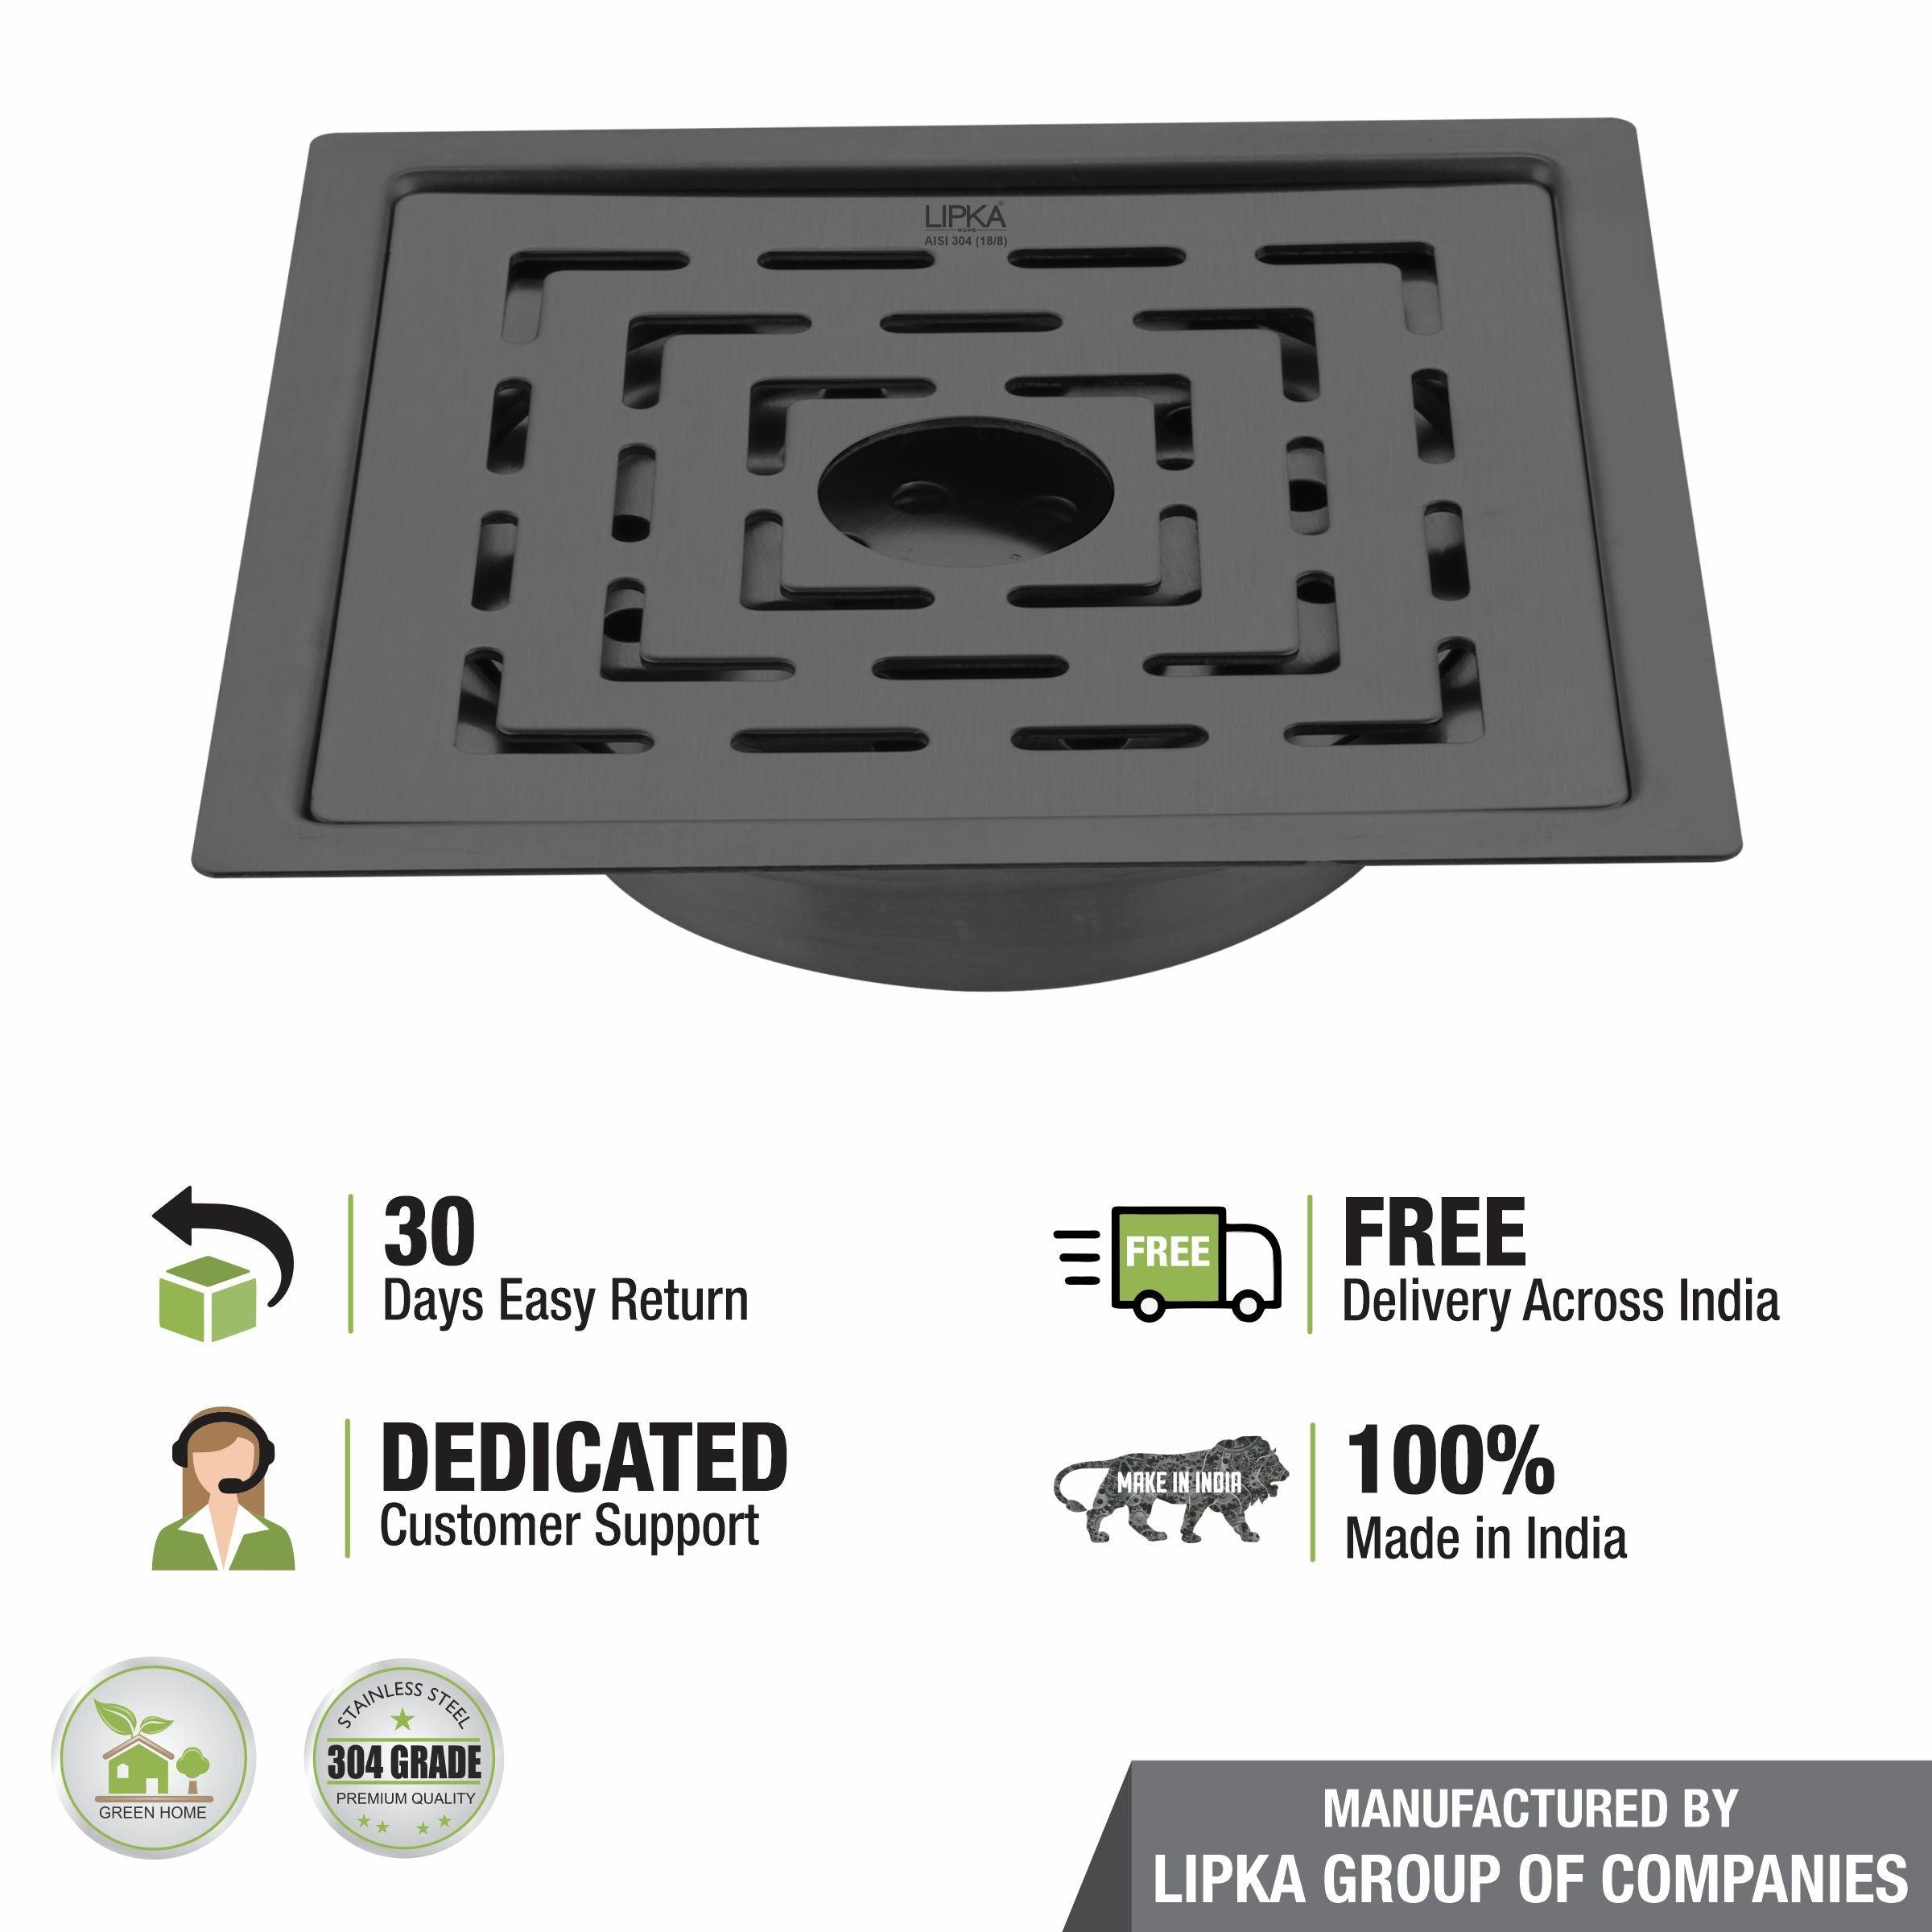 Orange Flat Cut Exclusive Square Floor Drain in Black PVD Coating (5 x 5 Inches) with Hole & Cockroach Trap - LIPKA - Lipka Home